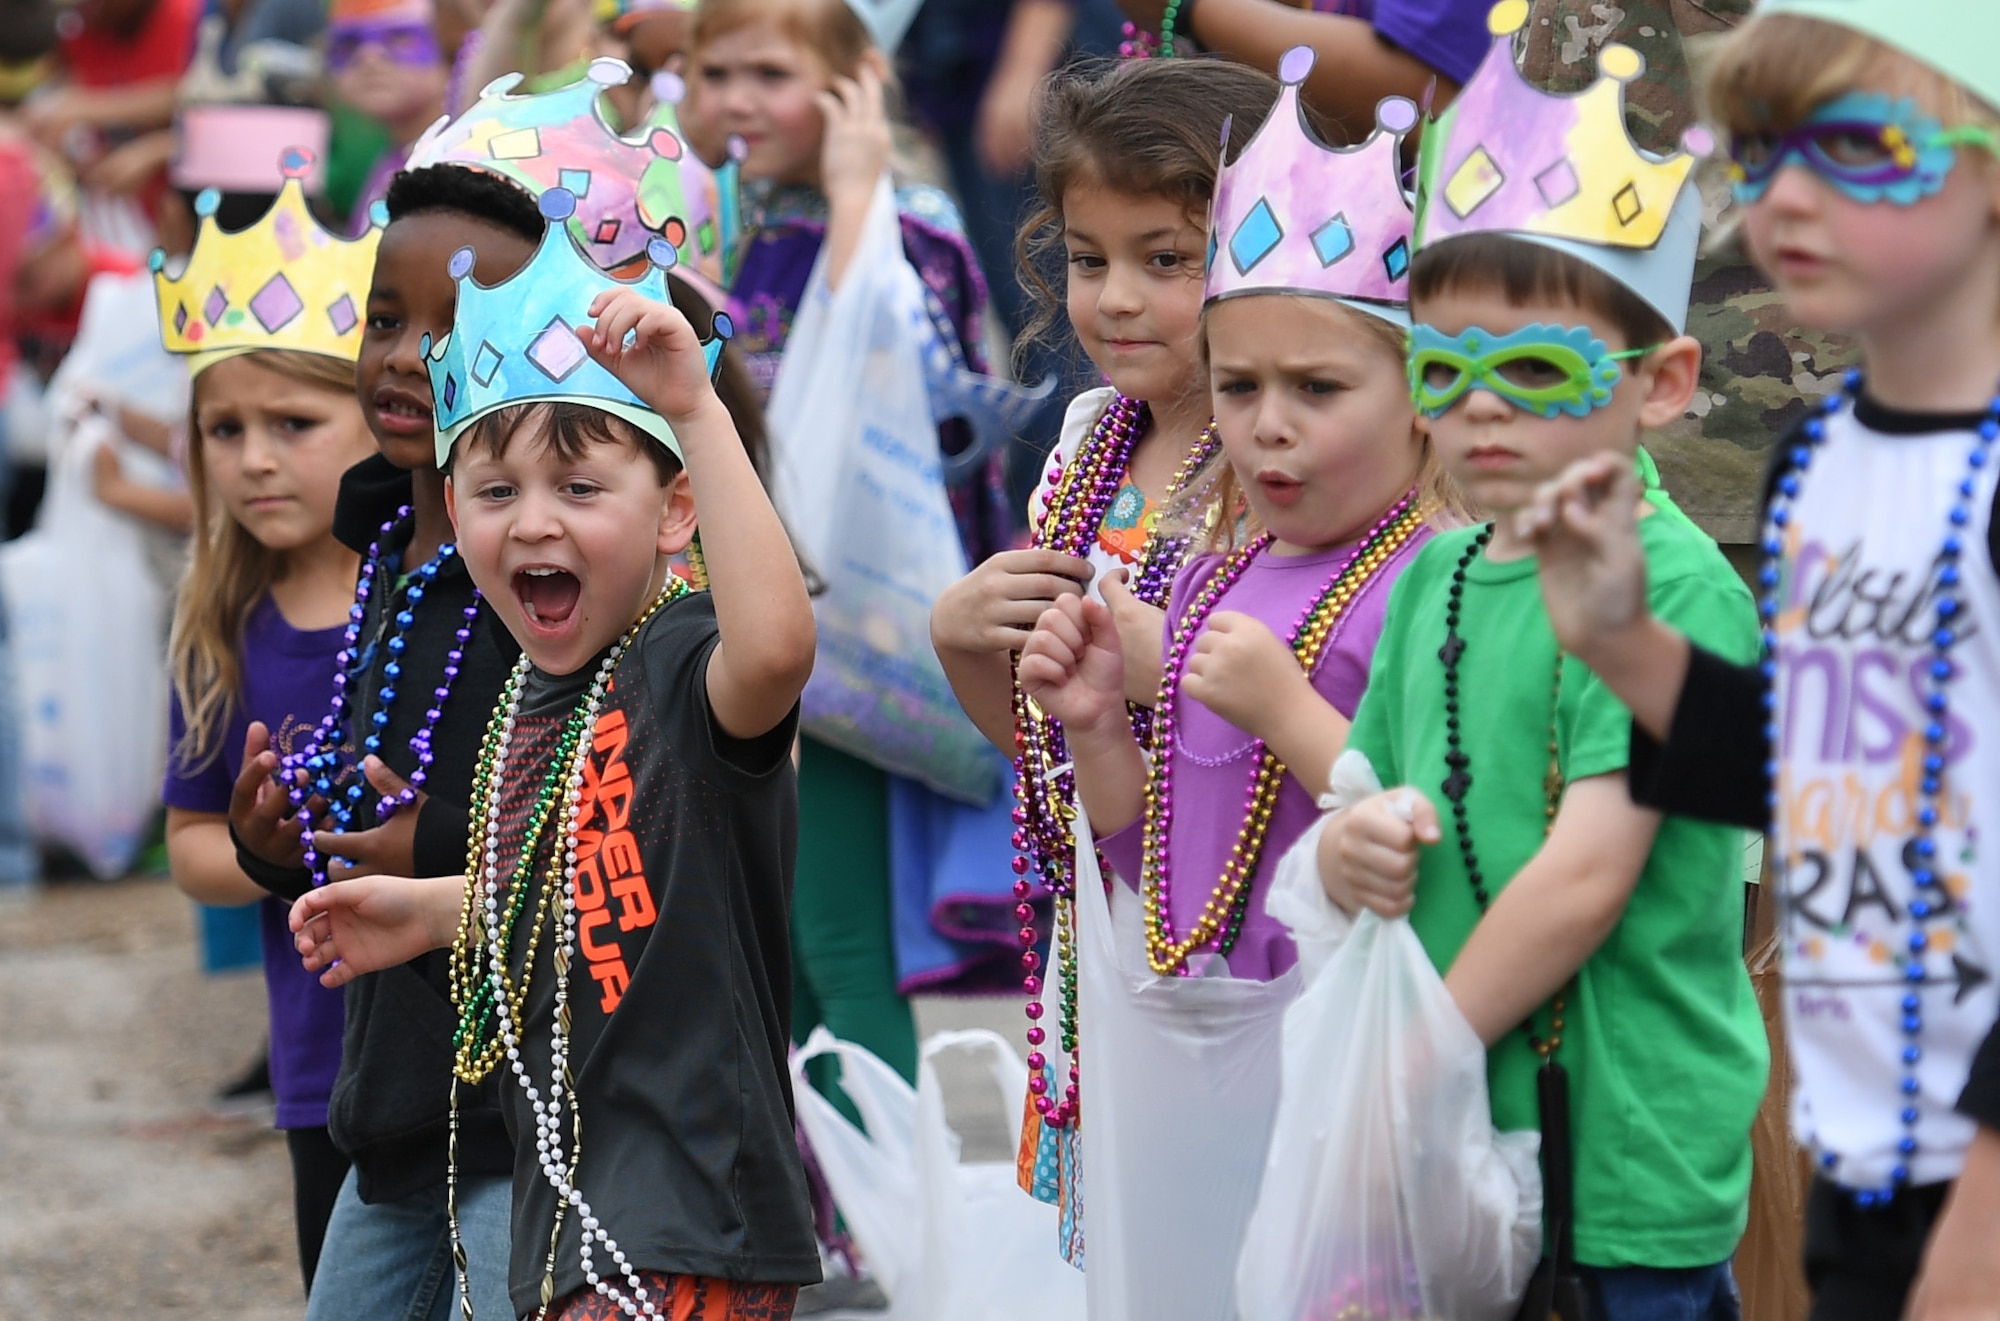 Children line the streets yelling for beads to be thrown his way while standing among class mates during the Jeff Davis Elementary School Mardi Gras parade in Biloxi, Mississippi, March 1, 2019. Keesler leadership, Honor Guard and Airmen participated in various festivities throughout the Mardi Gras season, which is celebrated by the local communities. (U.S. Air Force photo by Kemberly Groue)